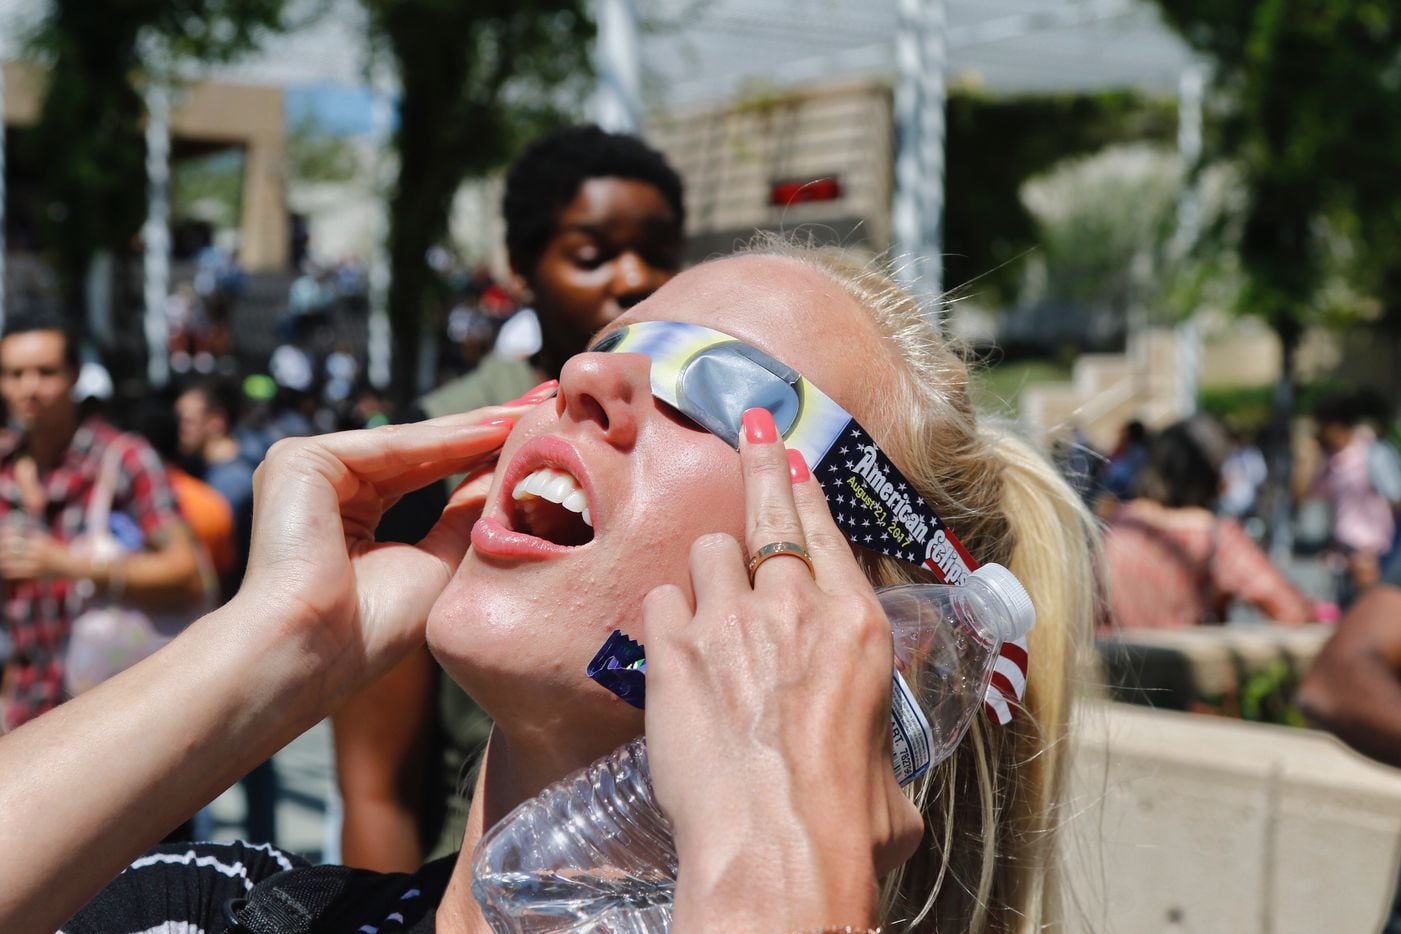 University of Texas at Dallas student Ashton Murray reacts as she views the solar eclipse through borrowed eclipse glasses. She was one of hundreds of students and faculty who stopped by the McDermott Library eclipse party.